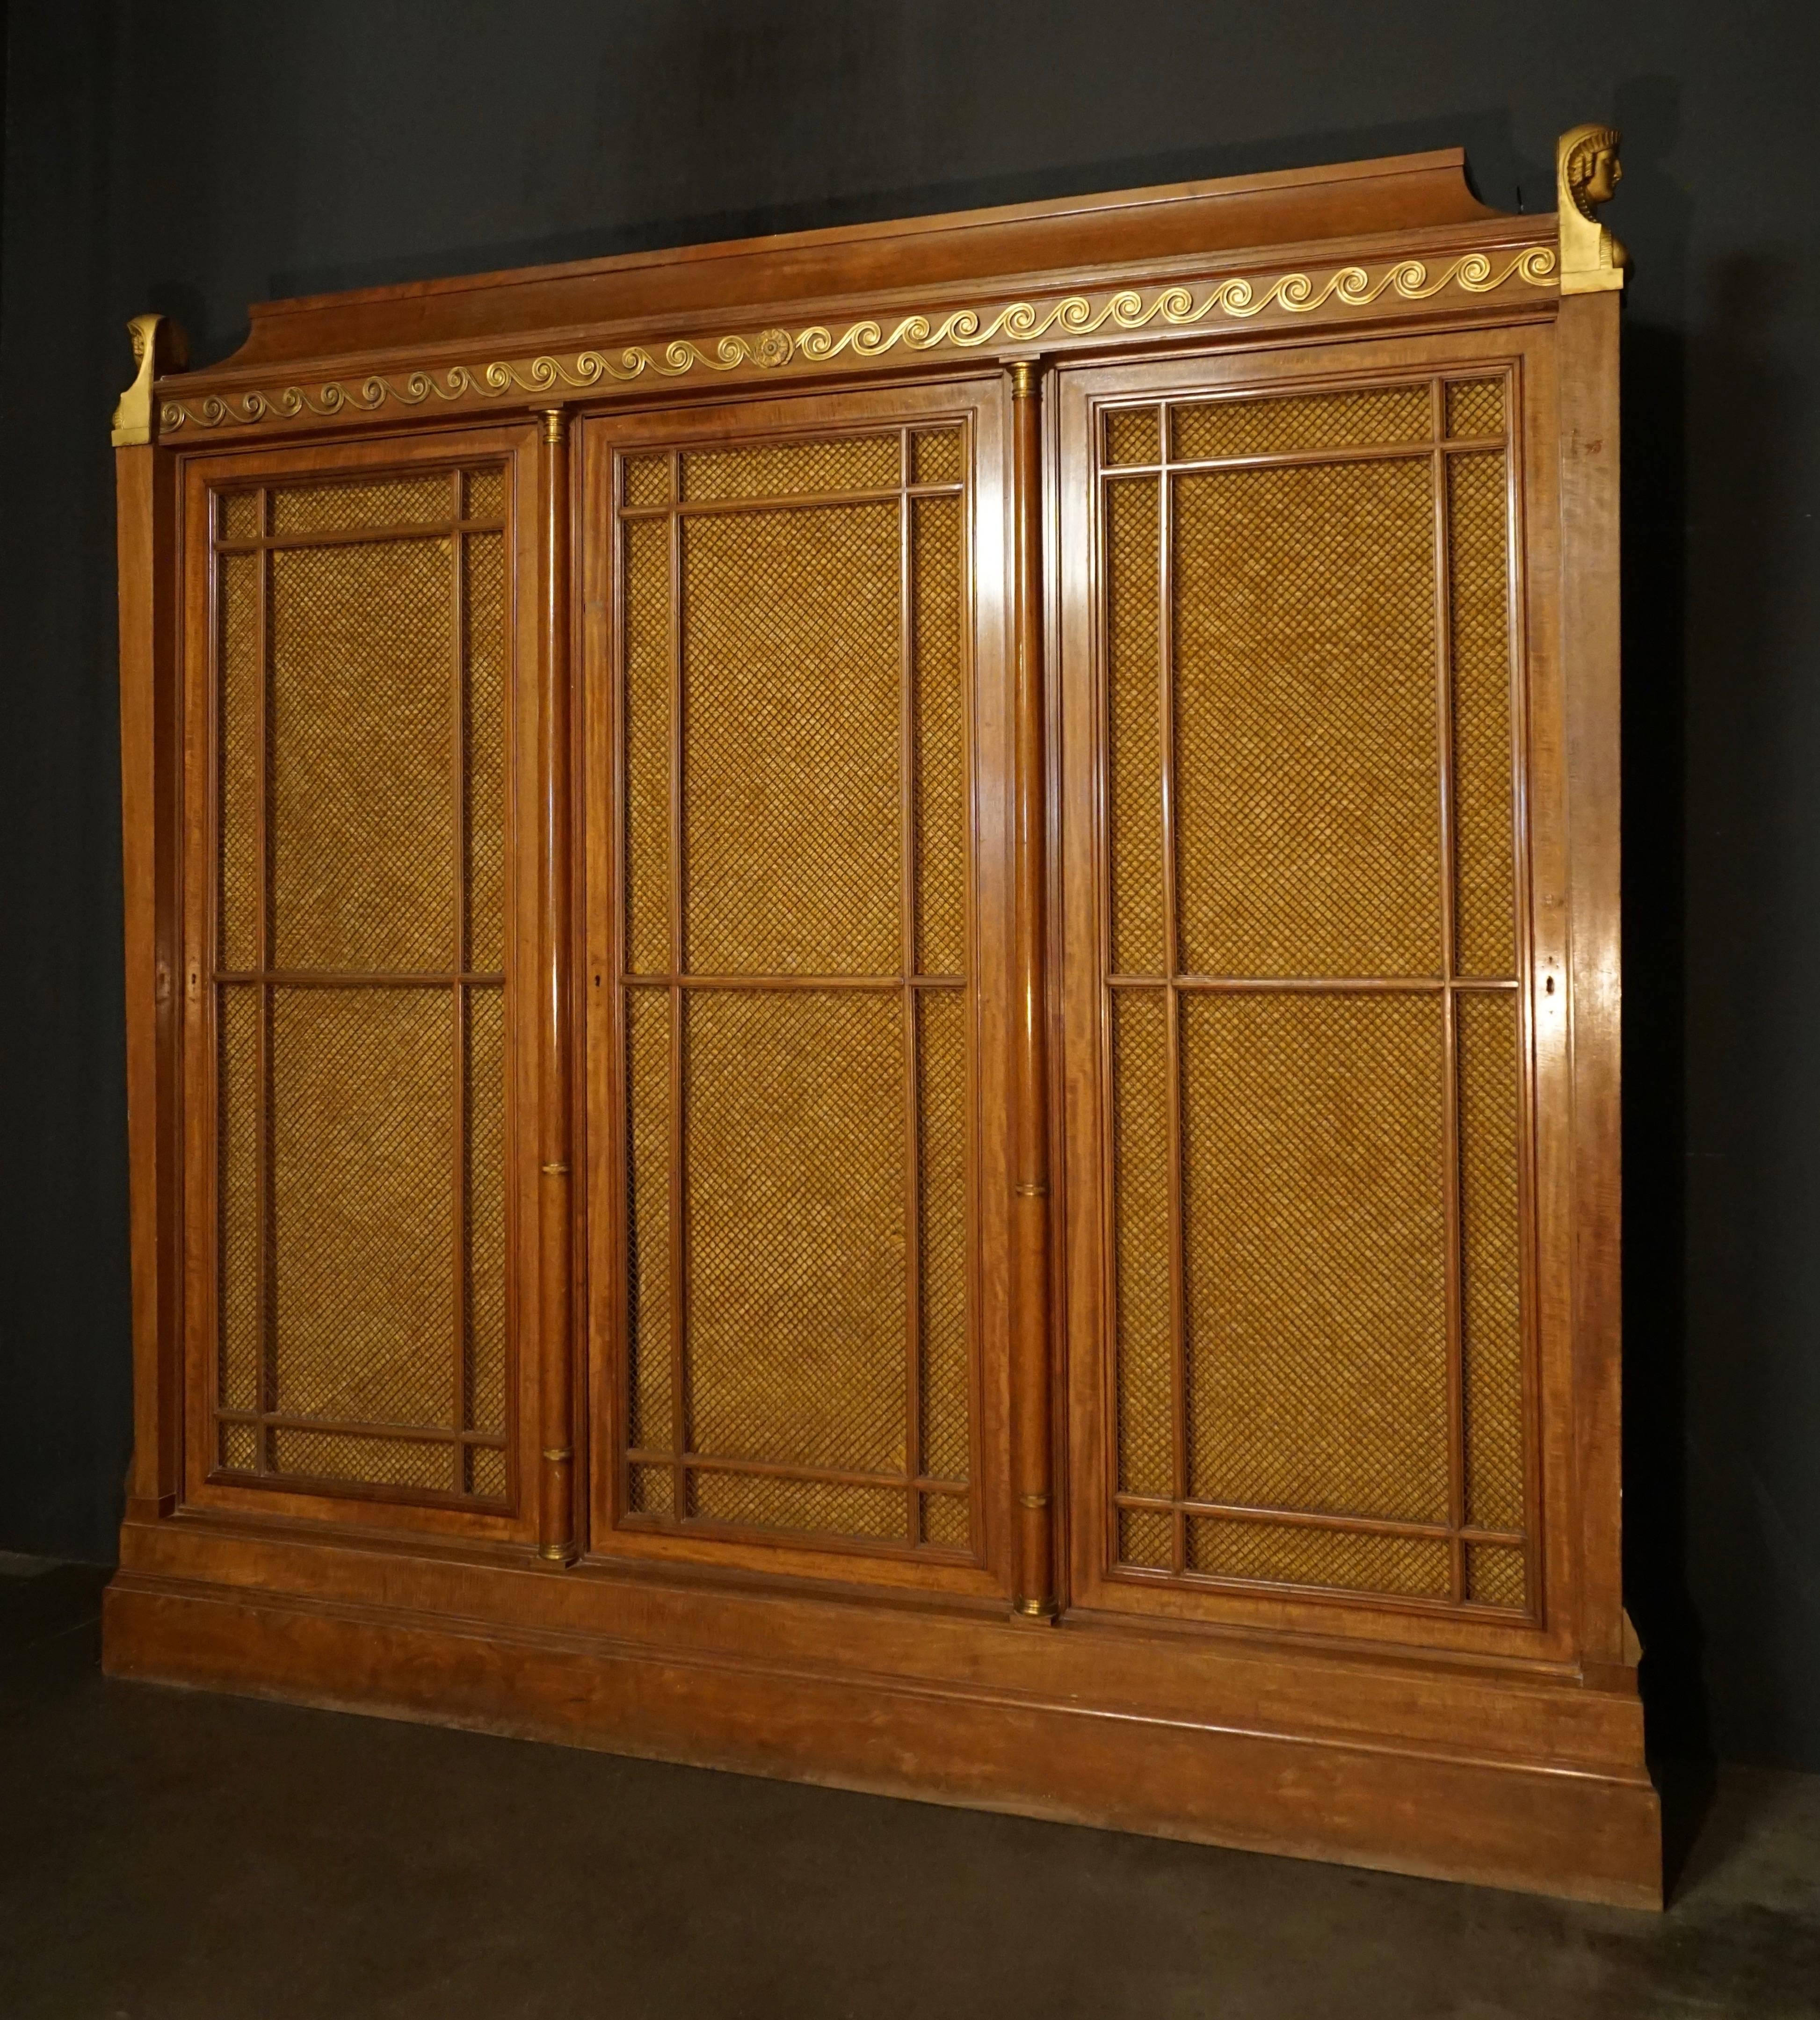 Rare and Magnificent Neoclassical Mahogany Bibliotheque Bookcase For Sale 3